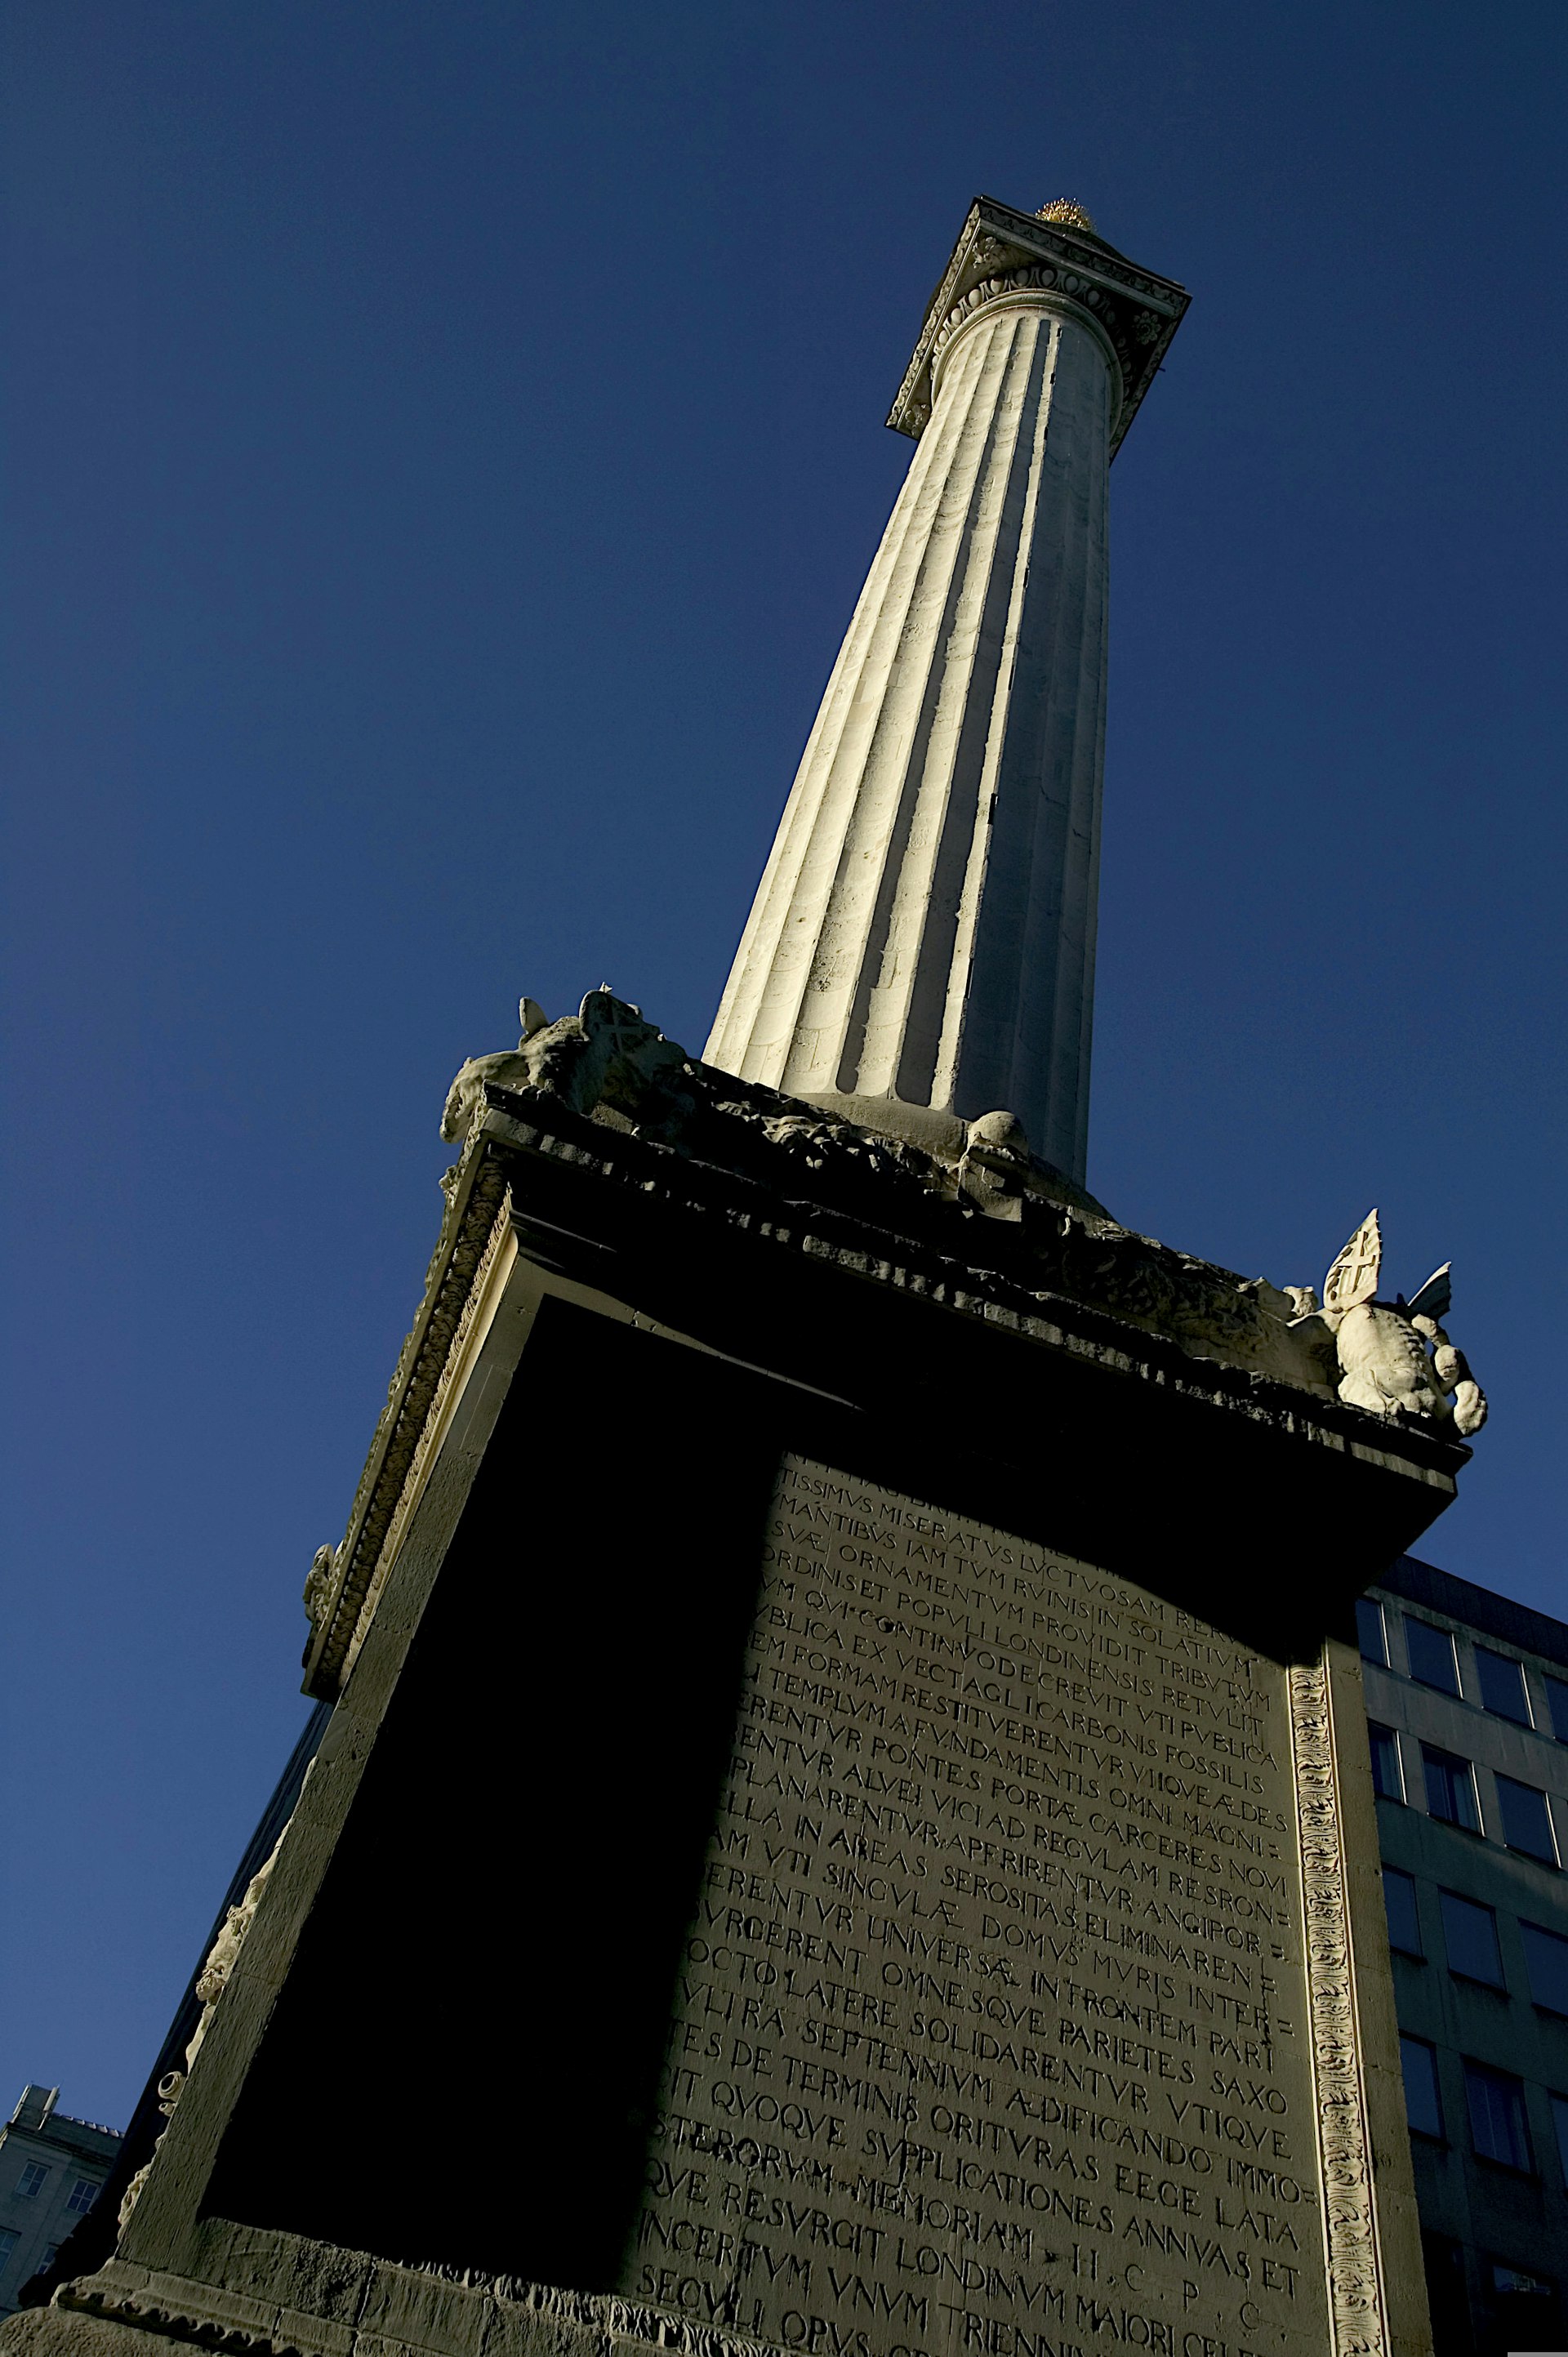 A view looking up at the Monument